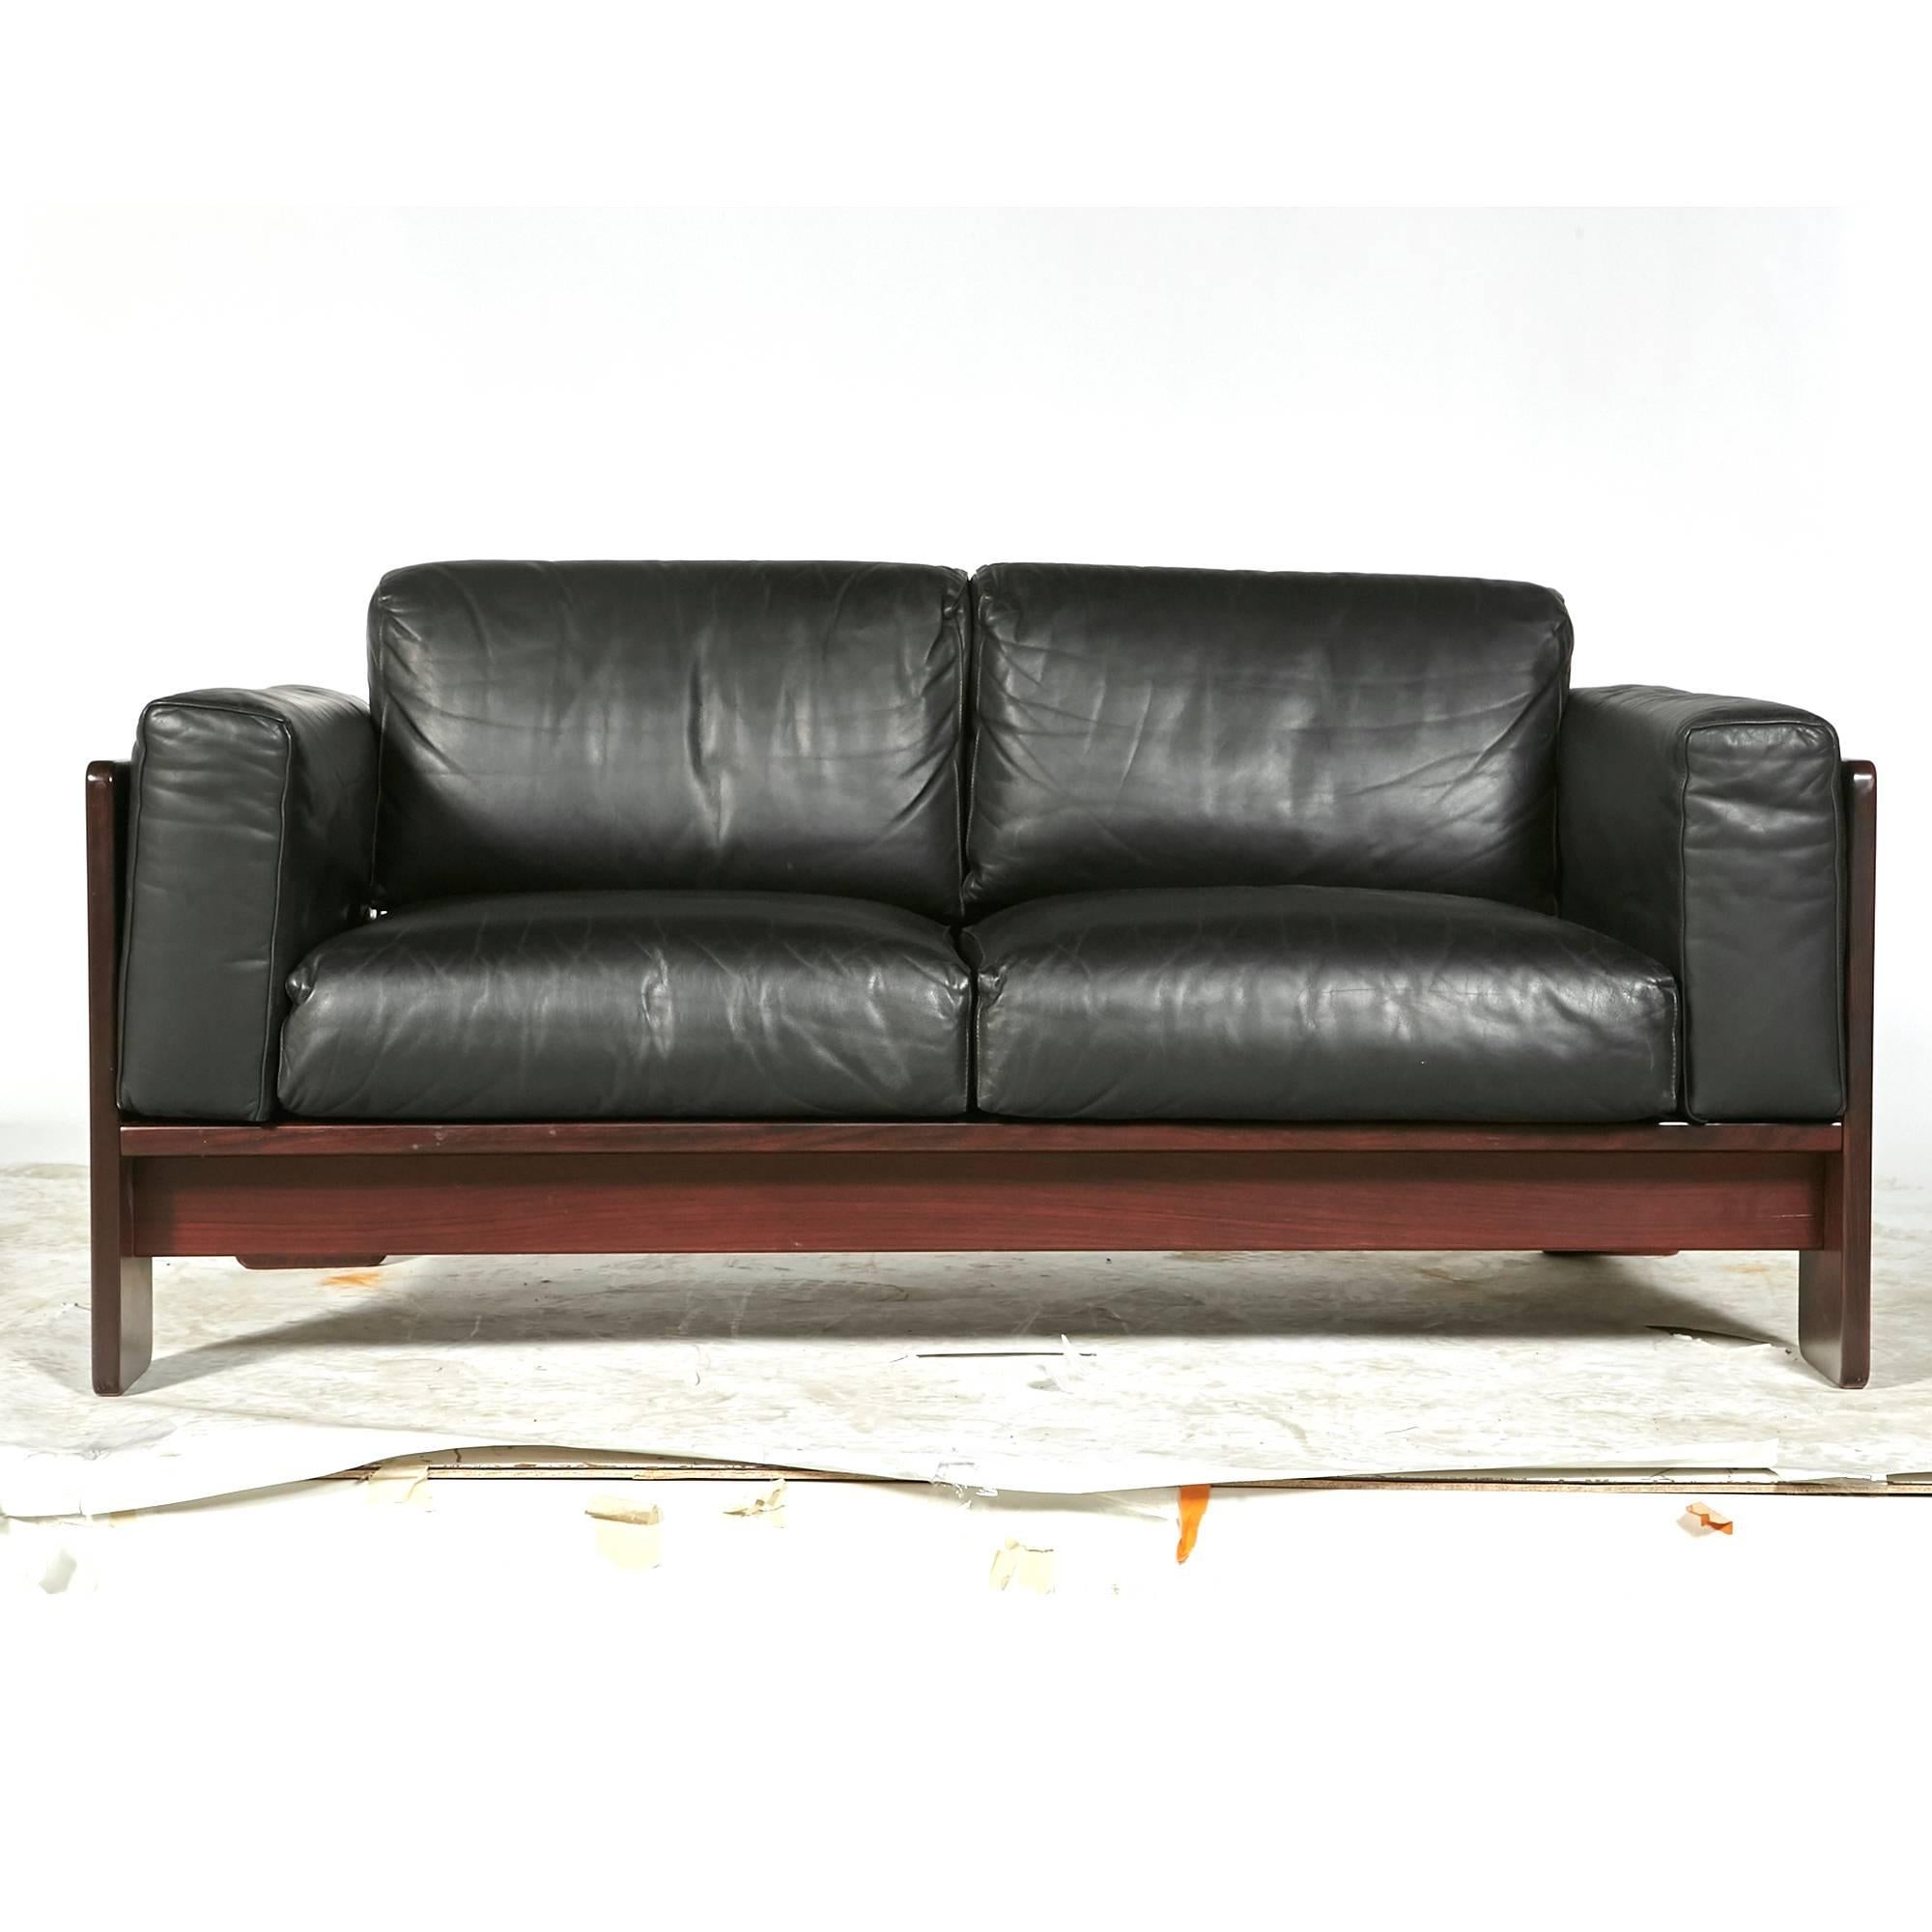 1960s Bastiano two-seat sofa in rosewood and black leather by Tobia Scarpa for Knoll. Measures: Arm is 23.5in H. Unmarked.

 